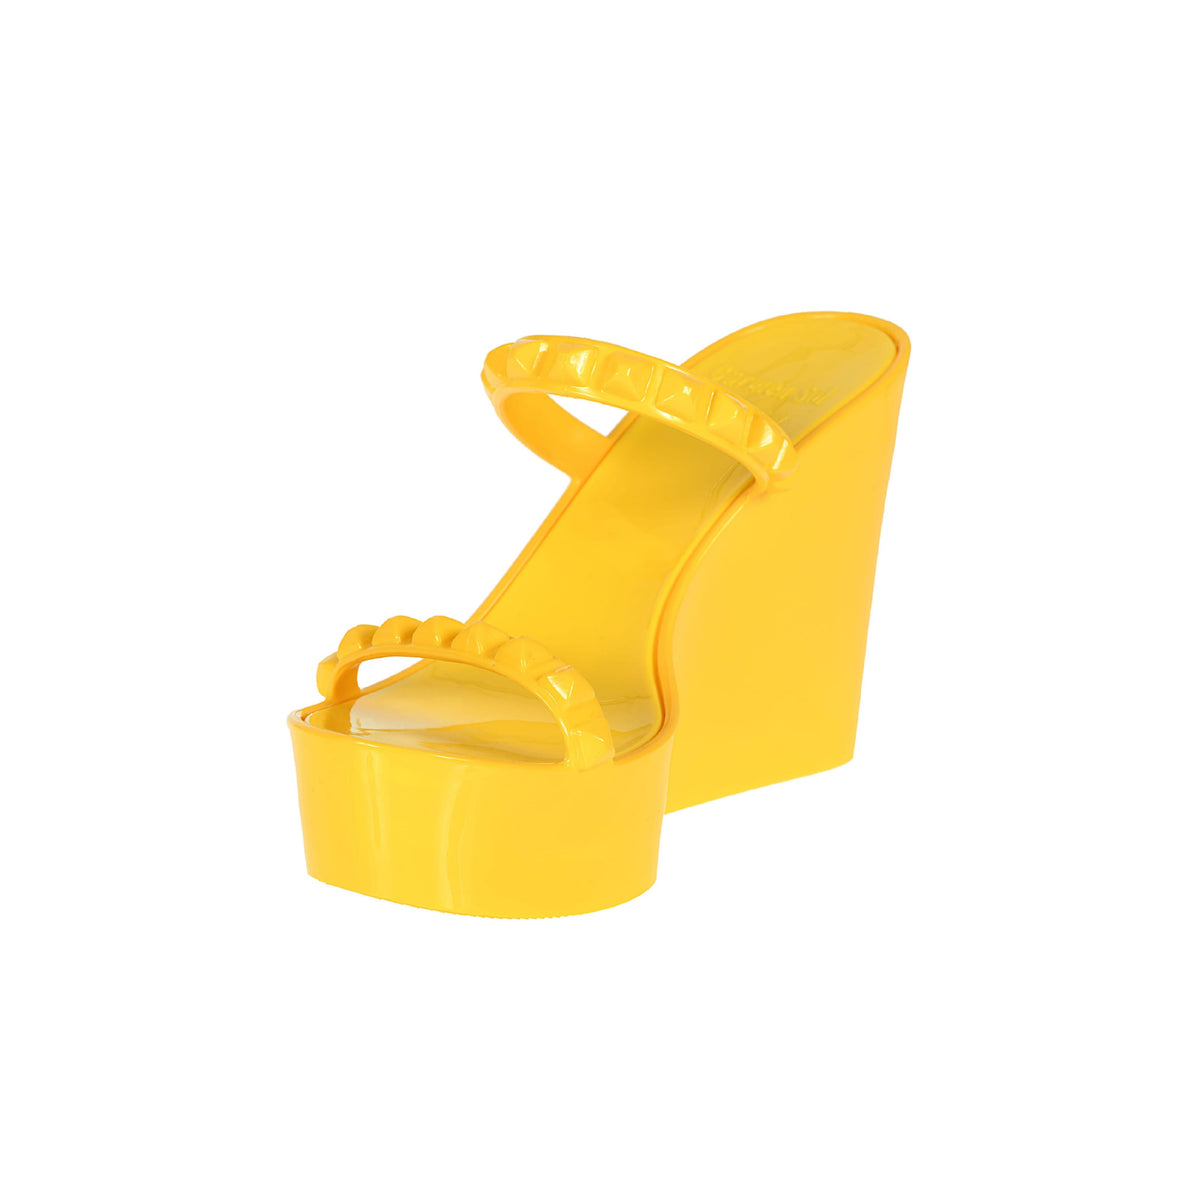 Carmen Sol jelly heels in color yellow on sale